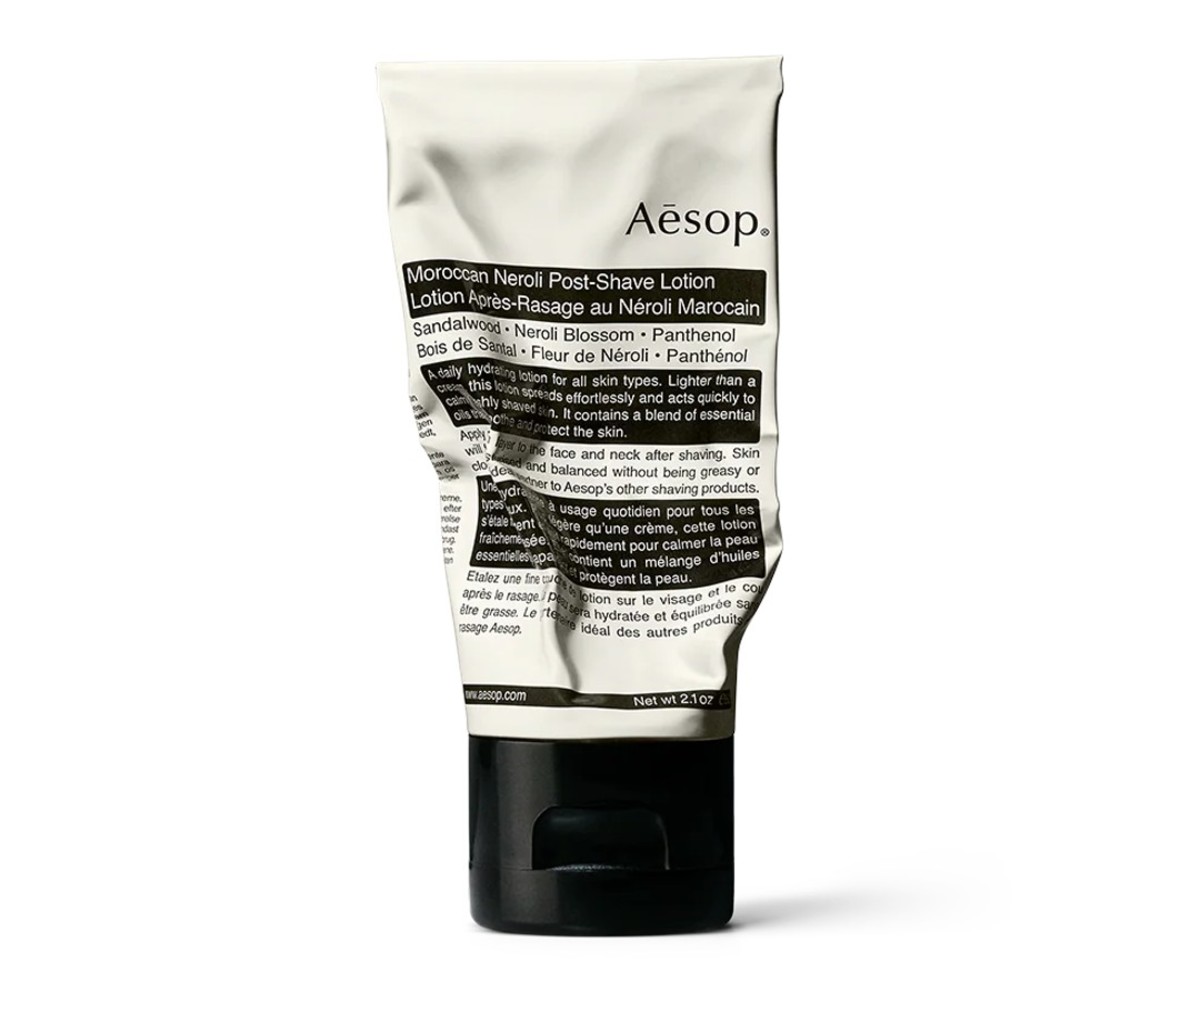 Moroccan Neroli Post-Shave Lotion by Aesop